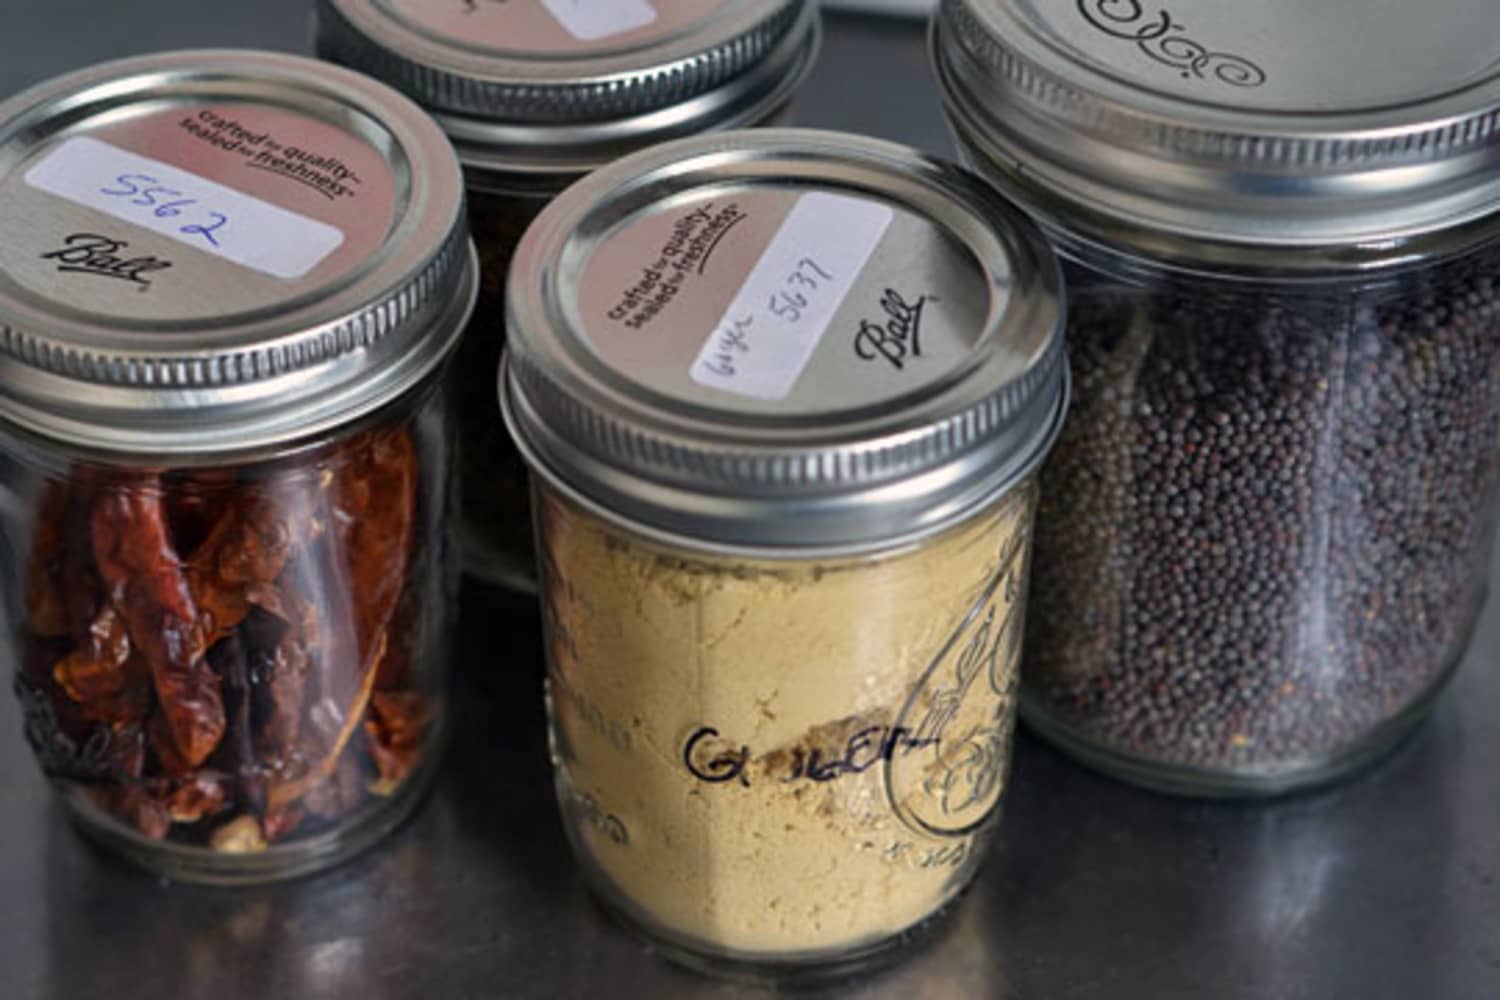 Spice Tins vs. Glass Jars vs. Plastic Containers: Comparing Spice Storage  Solutions